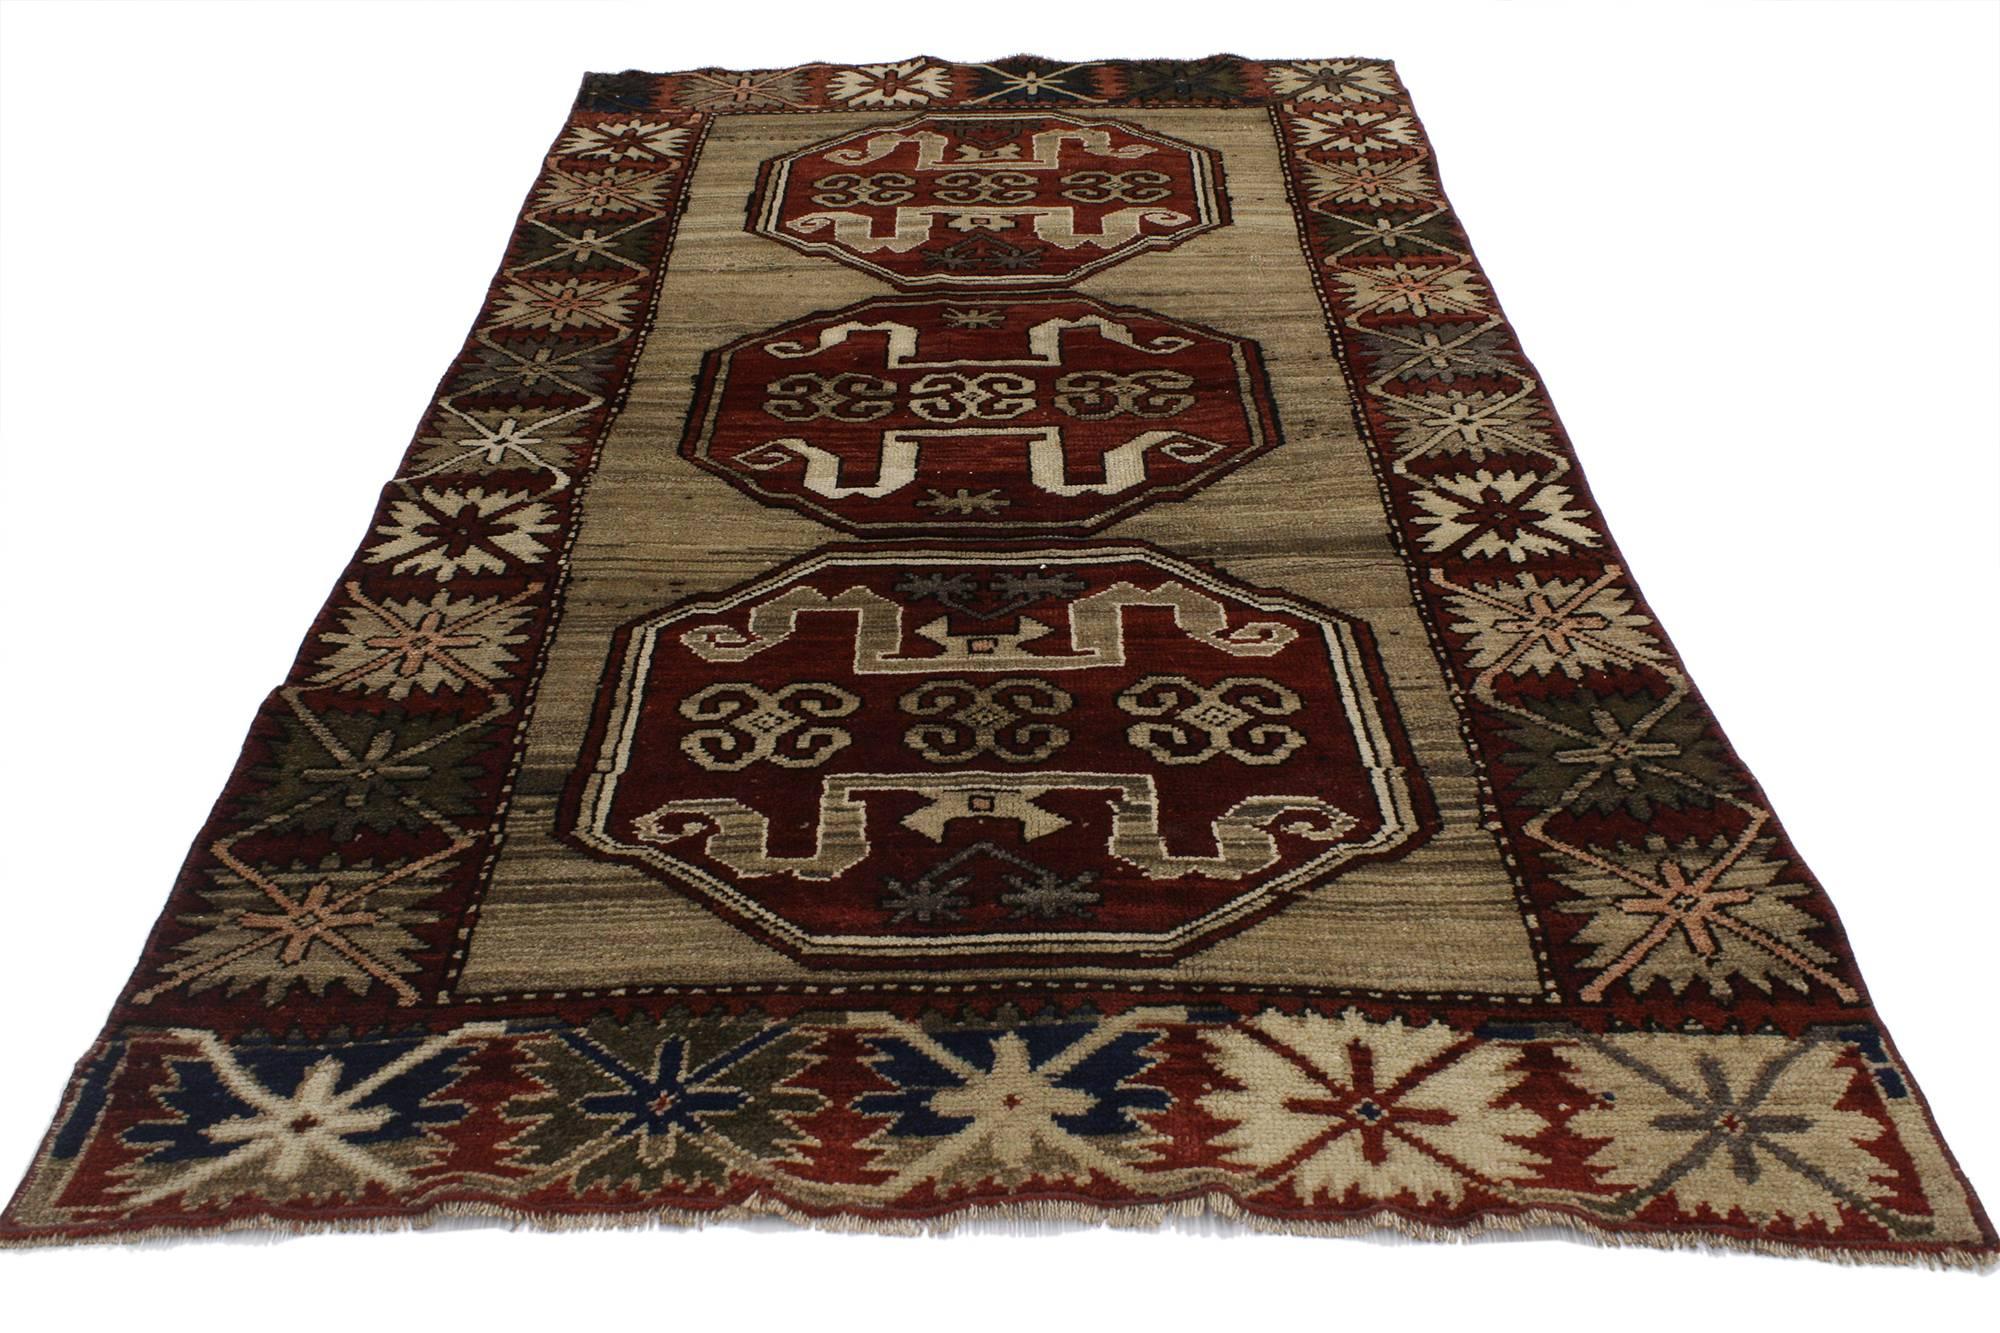 52109, Vintage Turkish Oushak Accent Rug with Rustic Lodge Tribal Style. This gorgeous hand-knotted wool Turkish Oushak rug features three octagonal medallions patterned with tribal symbols on a field of striated neutral colors. Geometric star